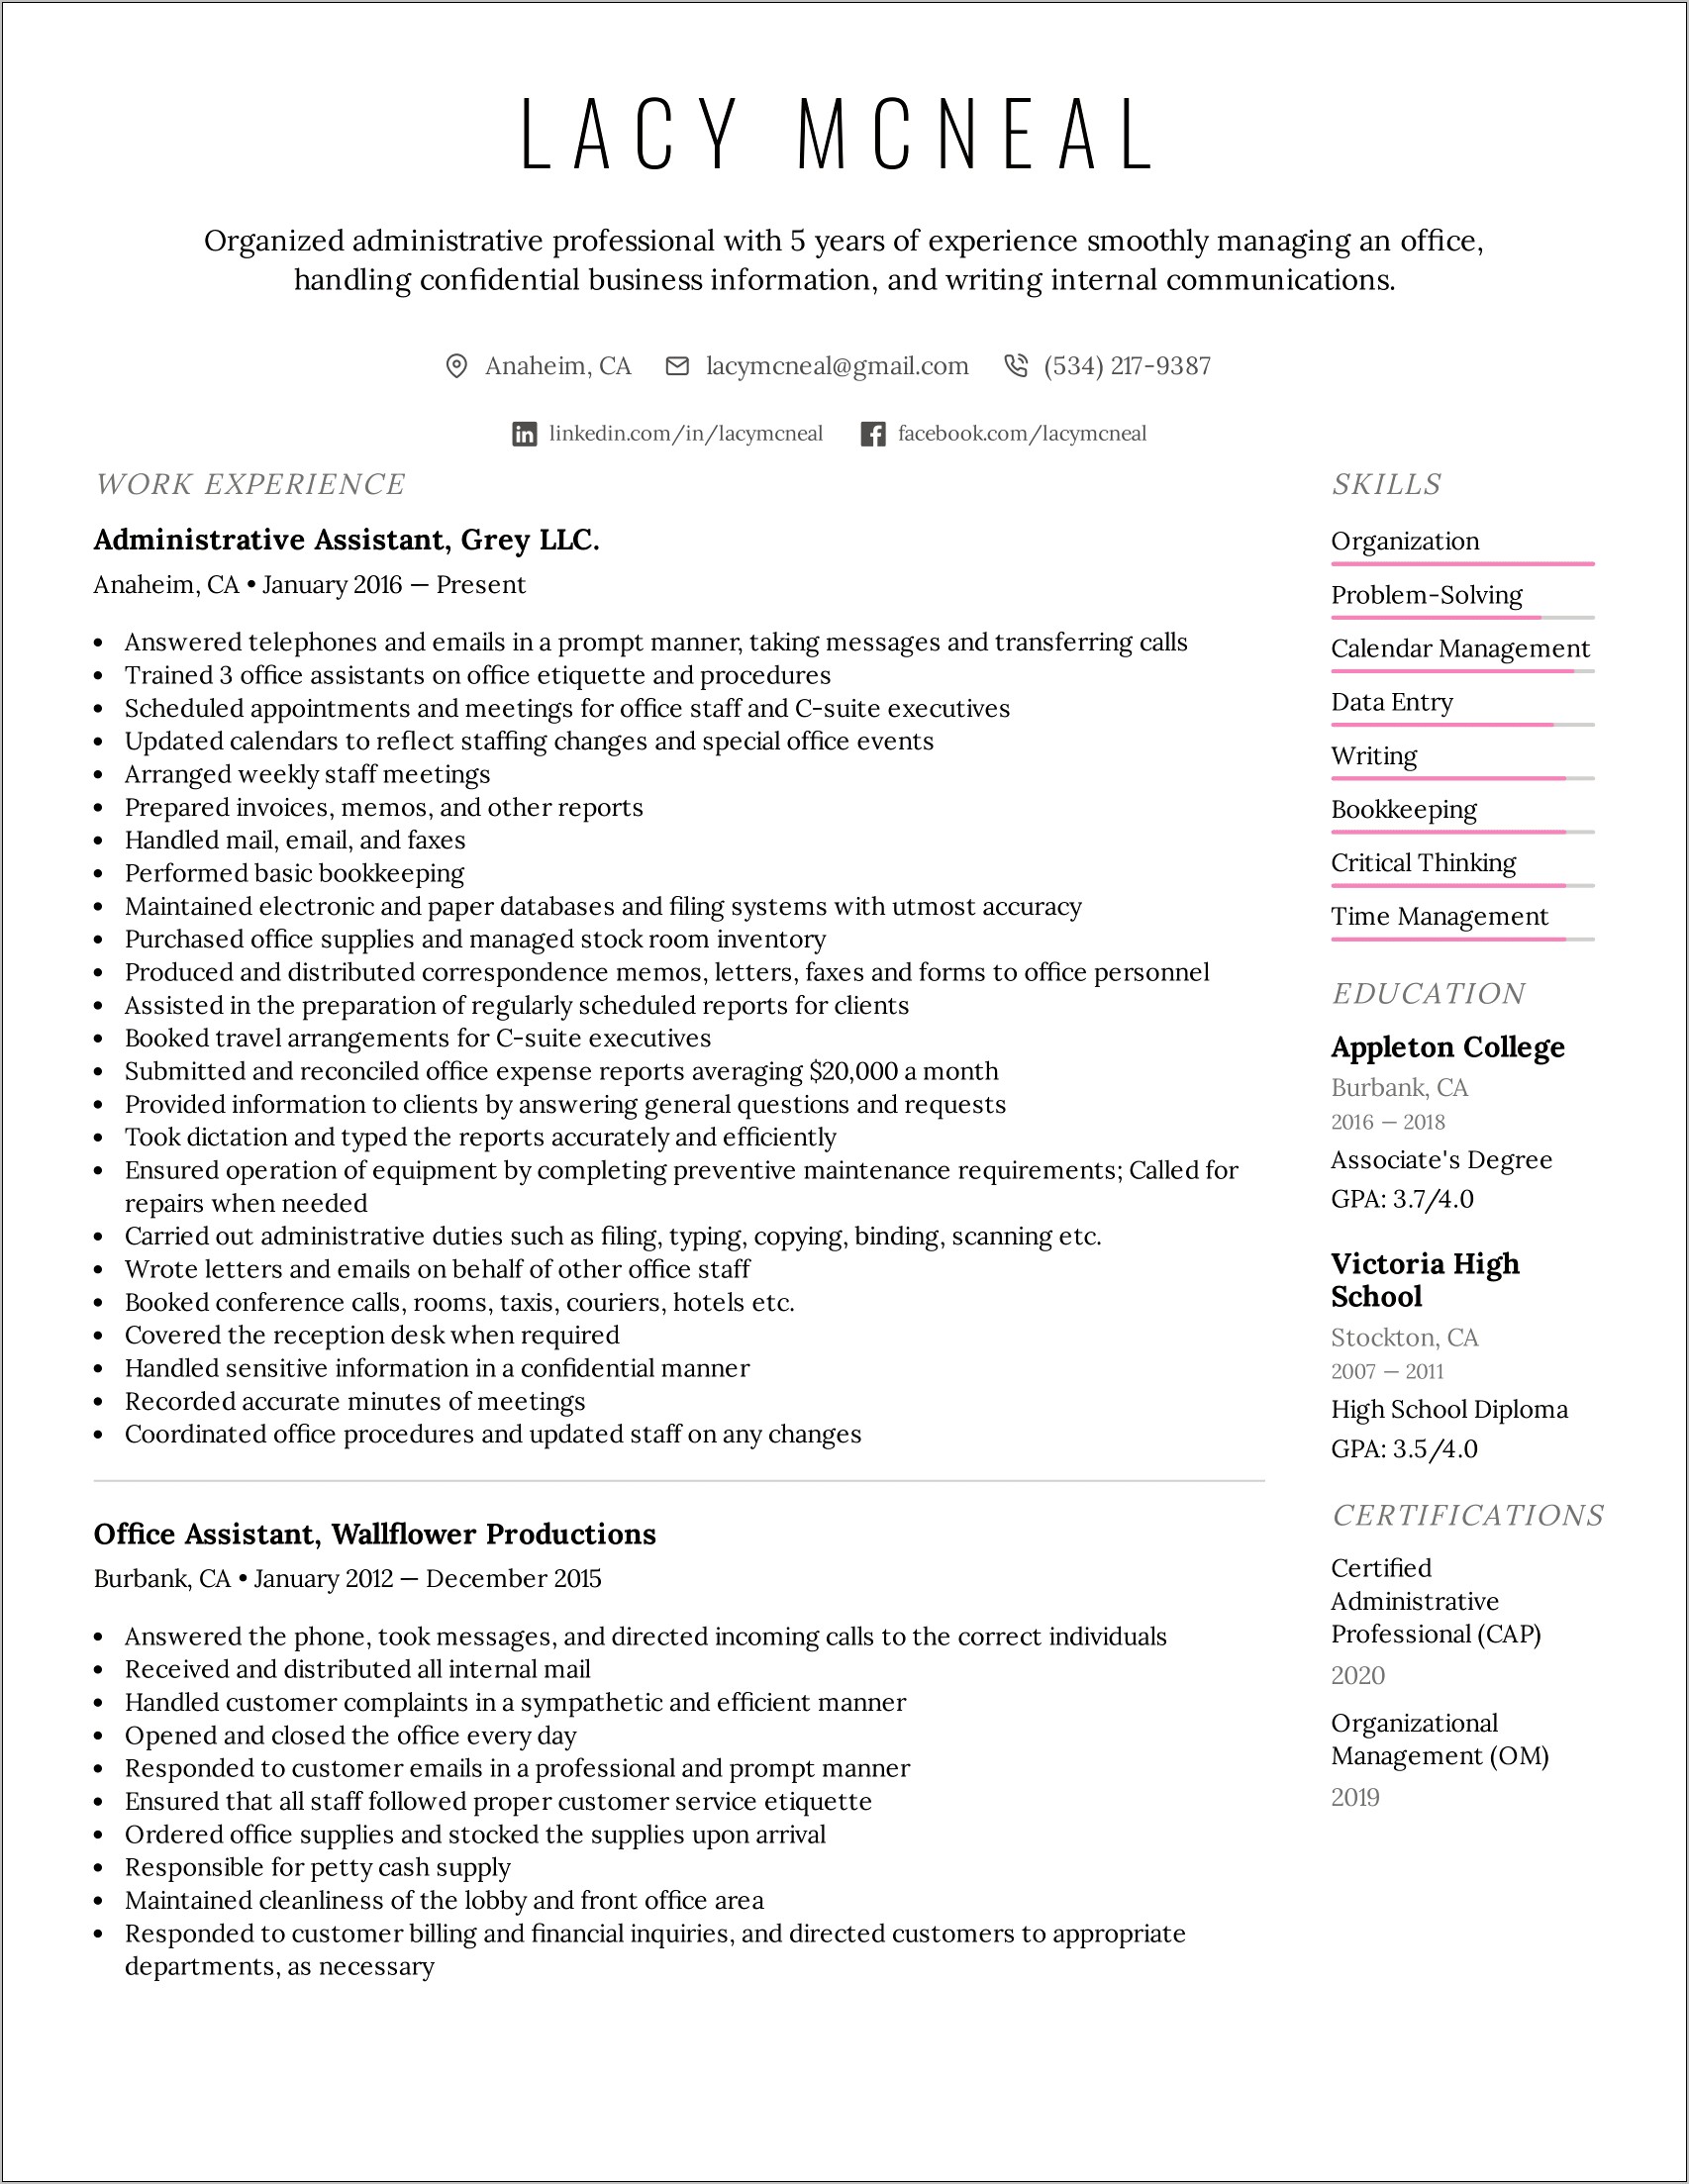 Best Resume Summary For Administrative Assistant